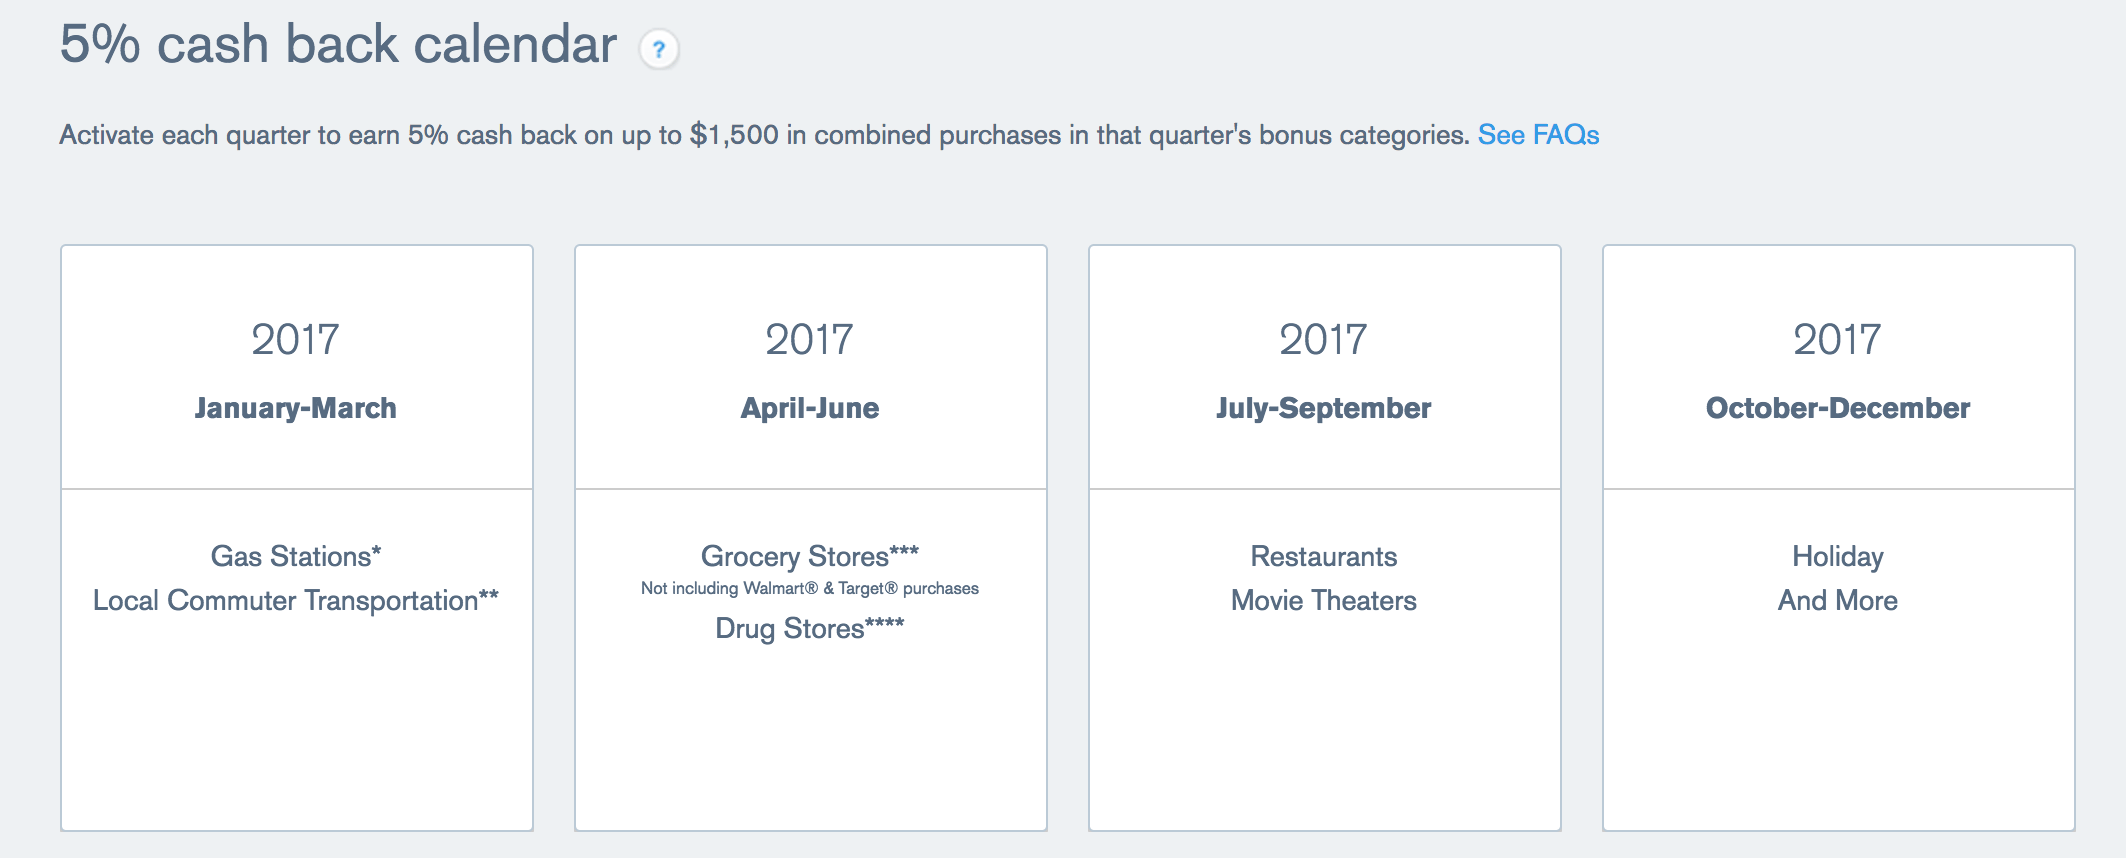 Chase Freedom Q3 Categories will Be Restaurants and Movie Theaters